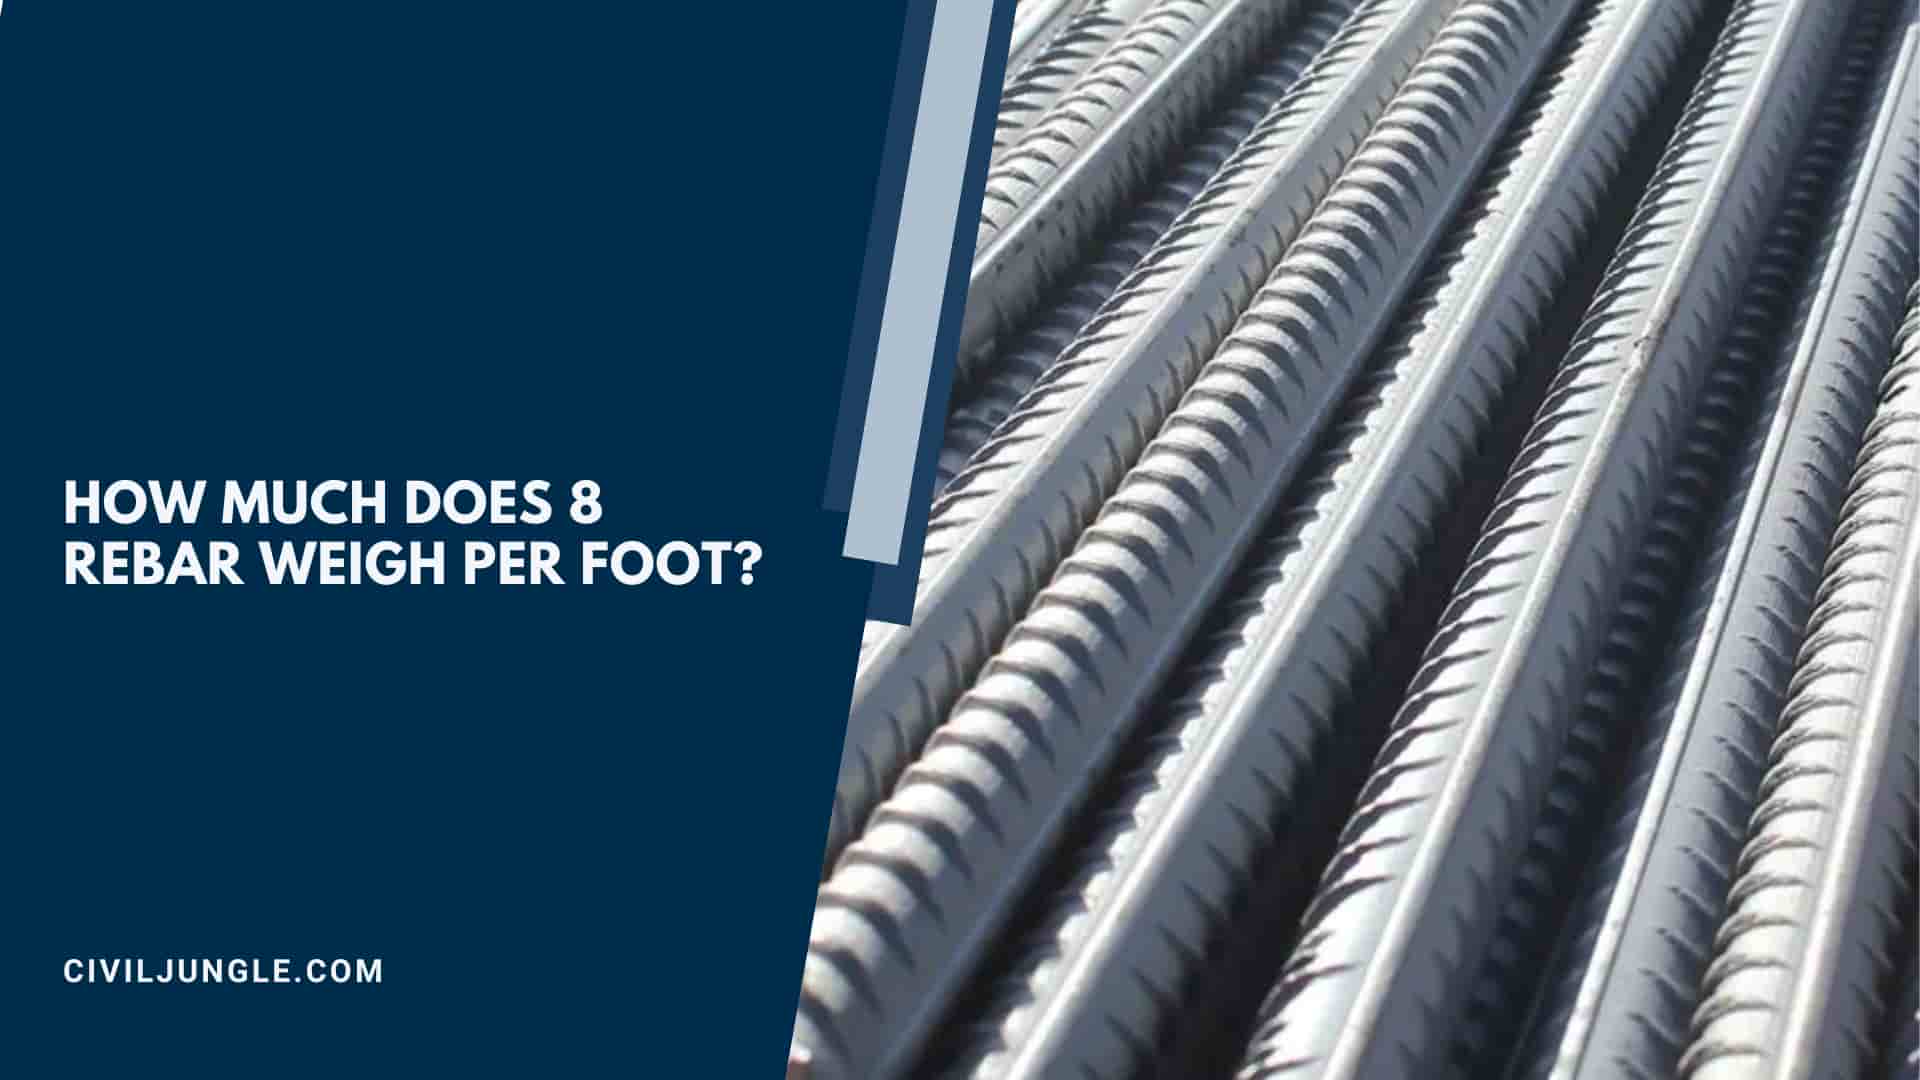 How Much Does 8 Rebar Weigh Per Foot?